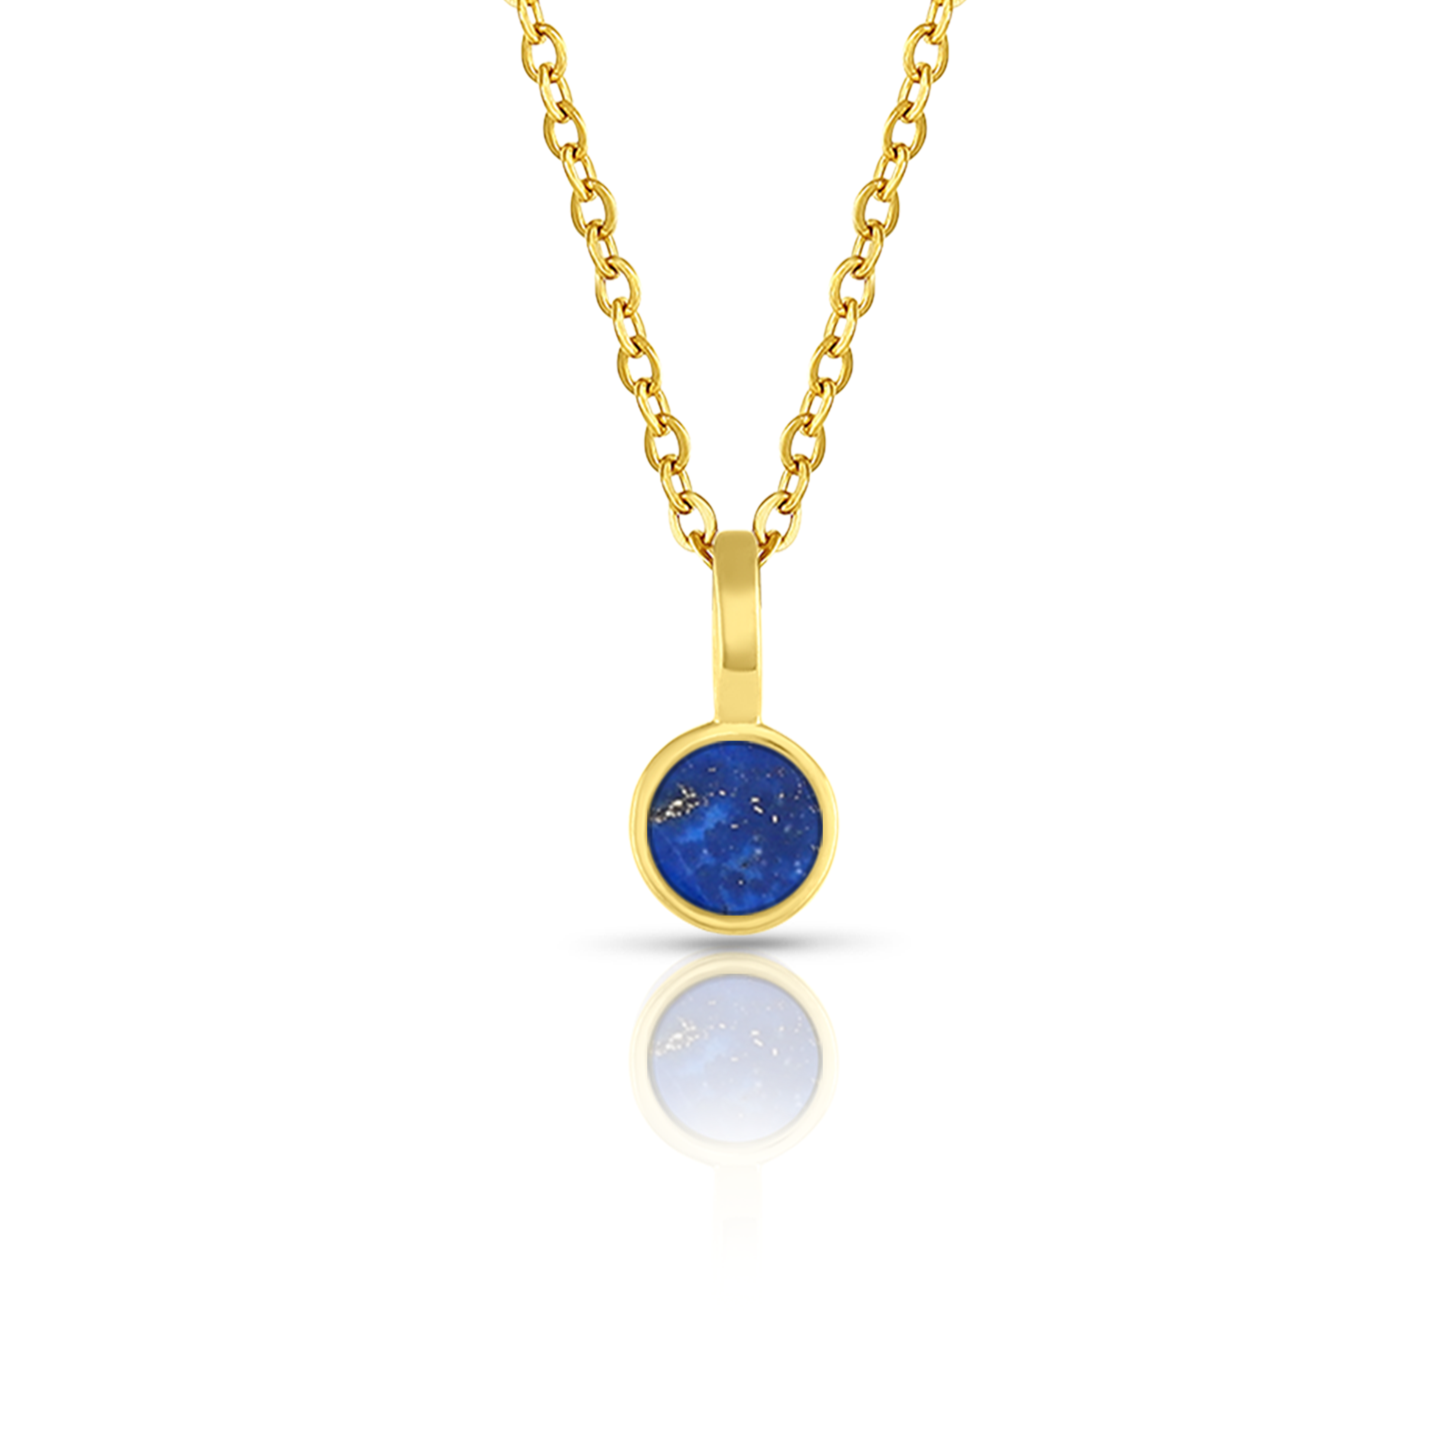 5mm Round Charm Yellow Gold plated Necklace in Royal Blue Round Natural Lapis Lazuli Gemstone made by Born to Rock Jewelry